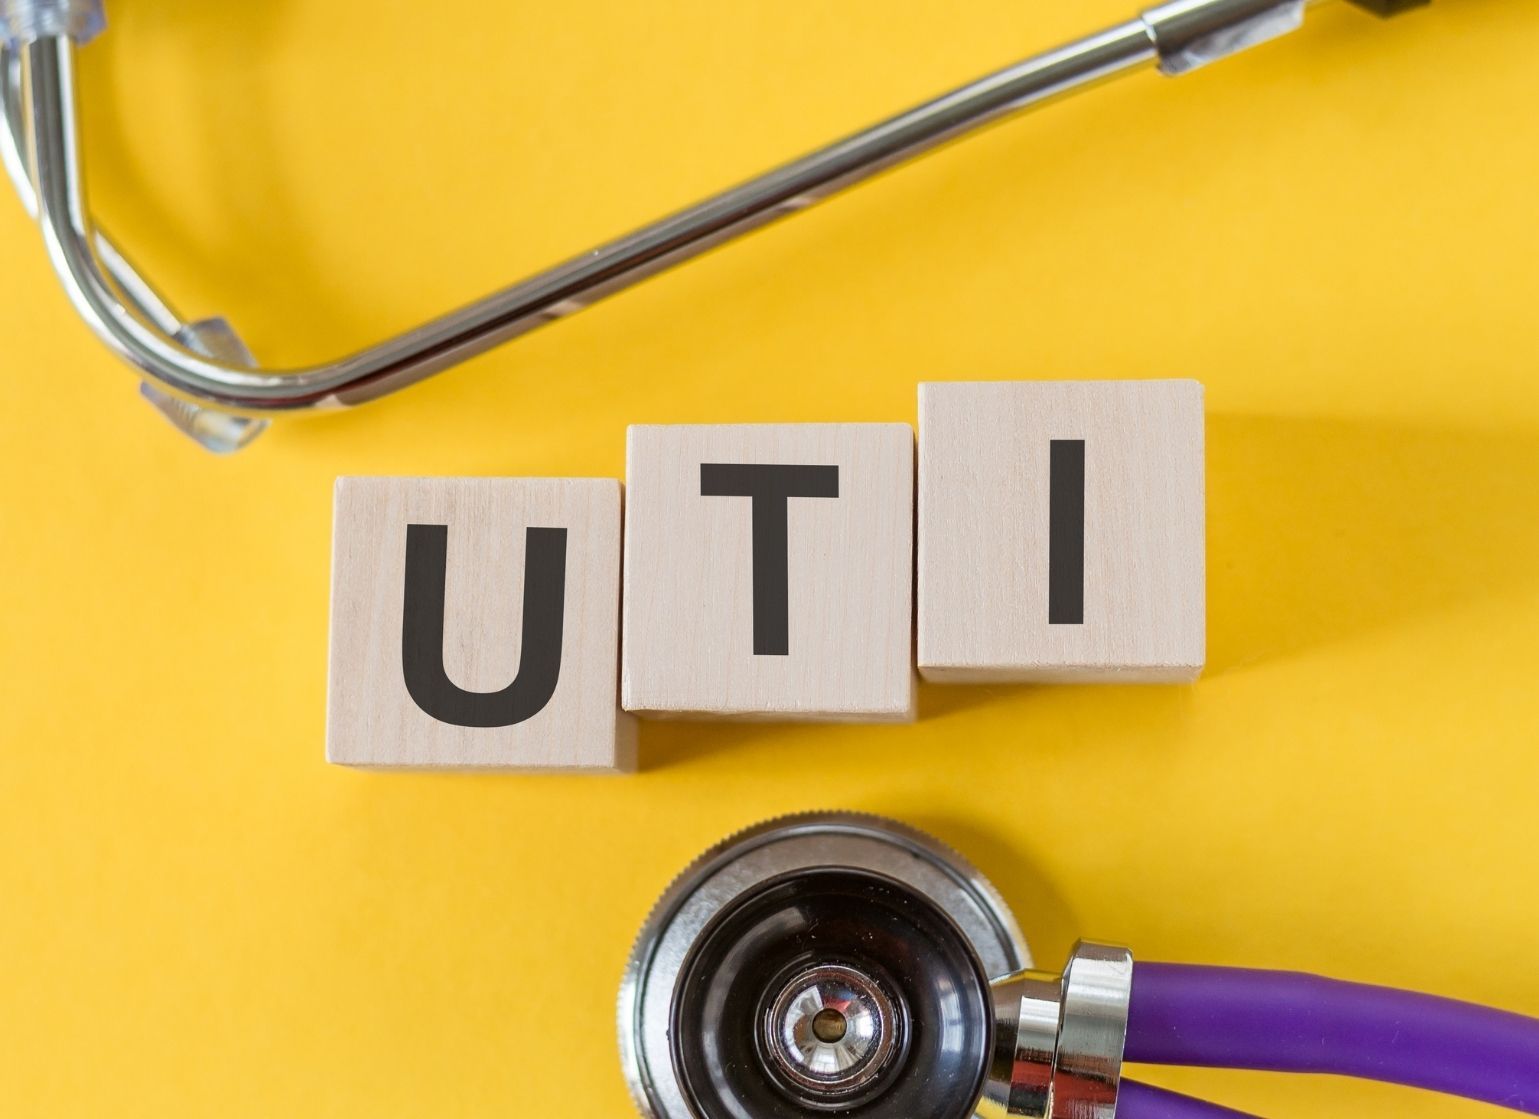 Best Homeopathic Medicine for UTI (Urinary Tract Infection)